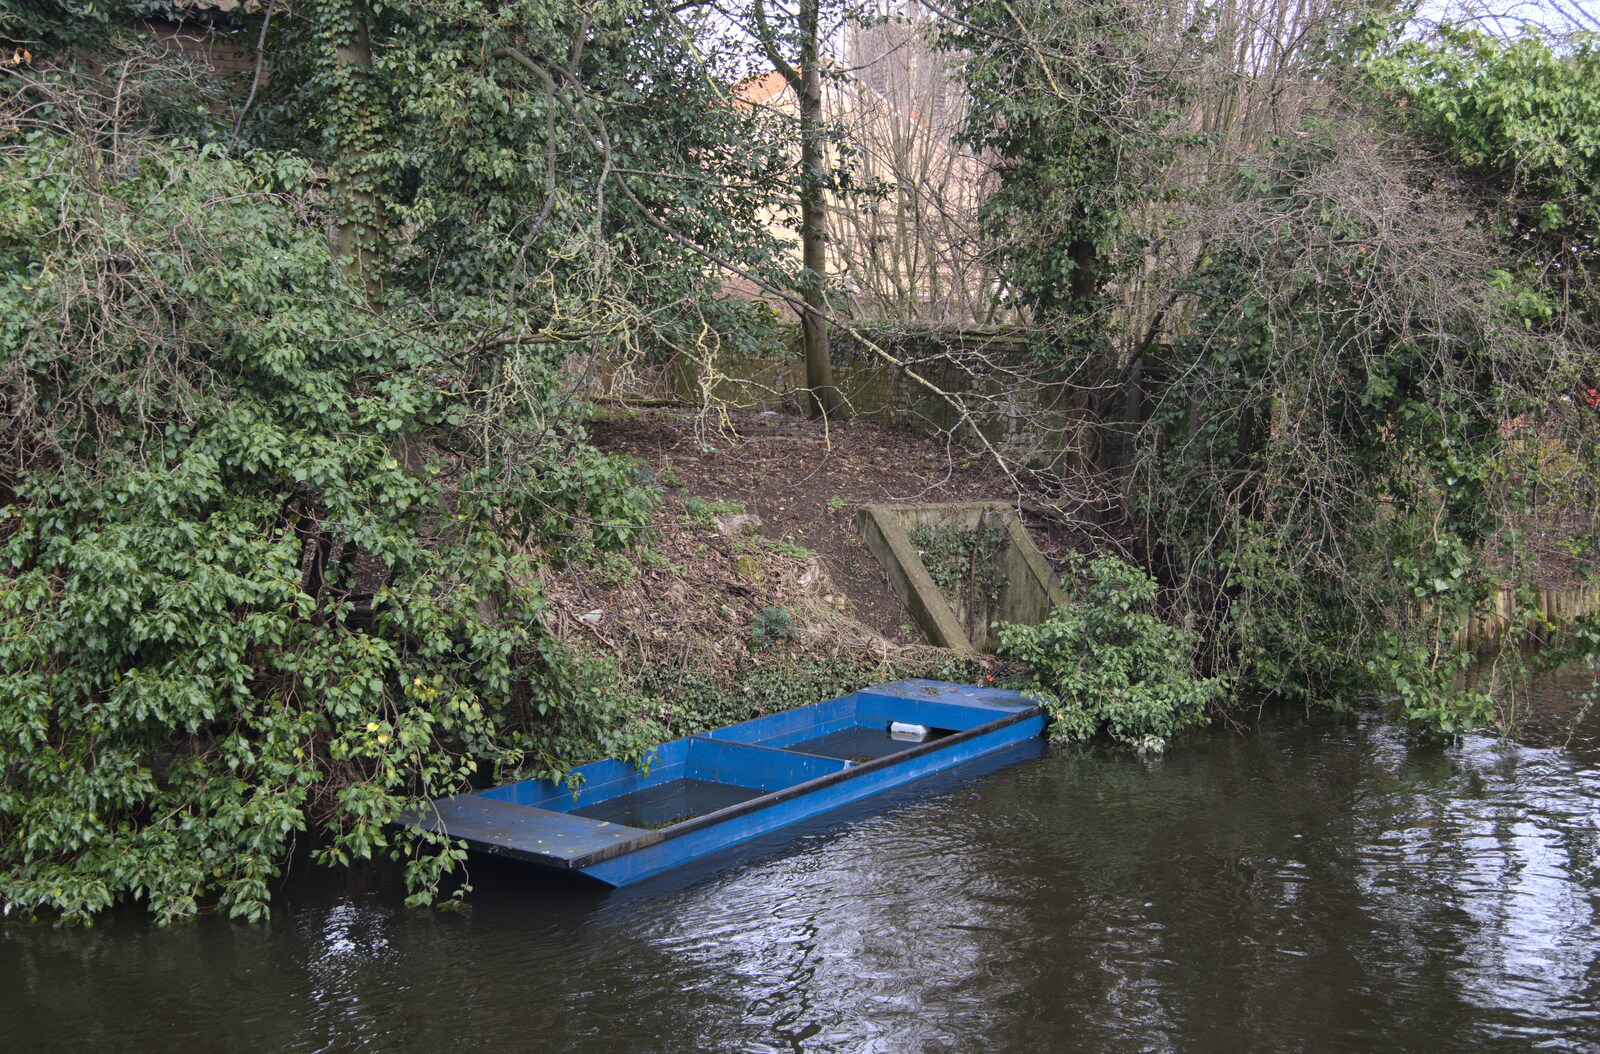 A partially-submerged punt on the Little Ouse from A Postcard from Thetford, Norfolk - 15th March 2023